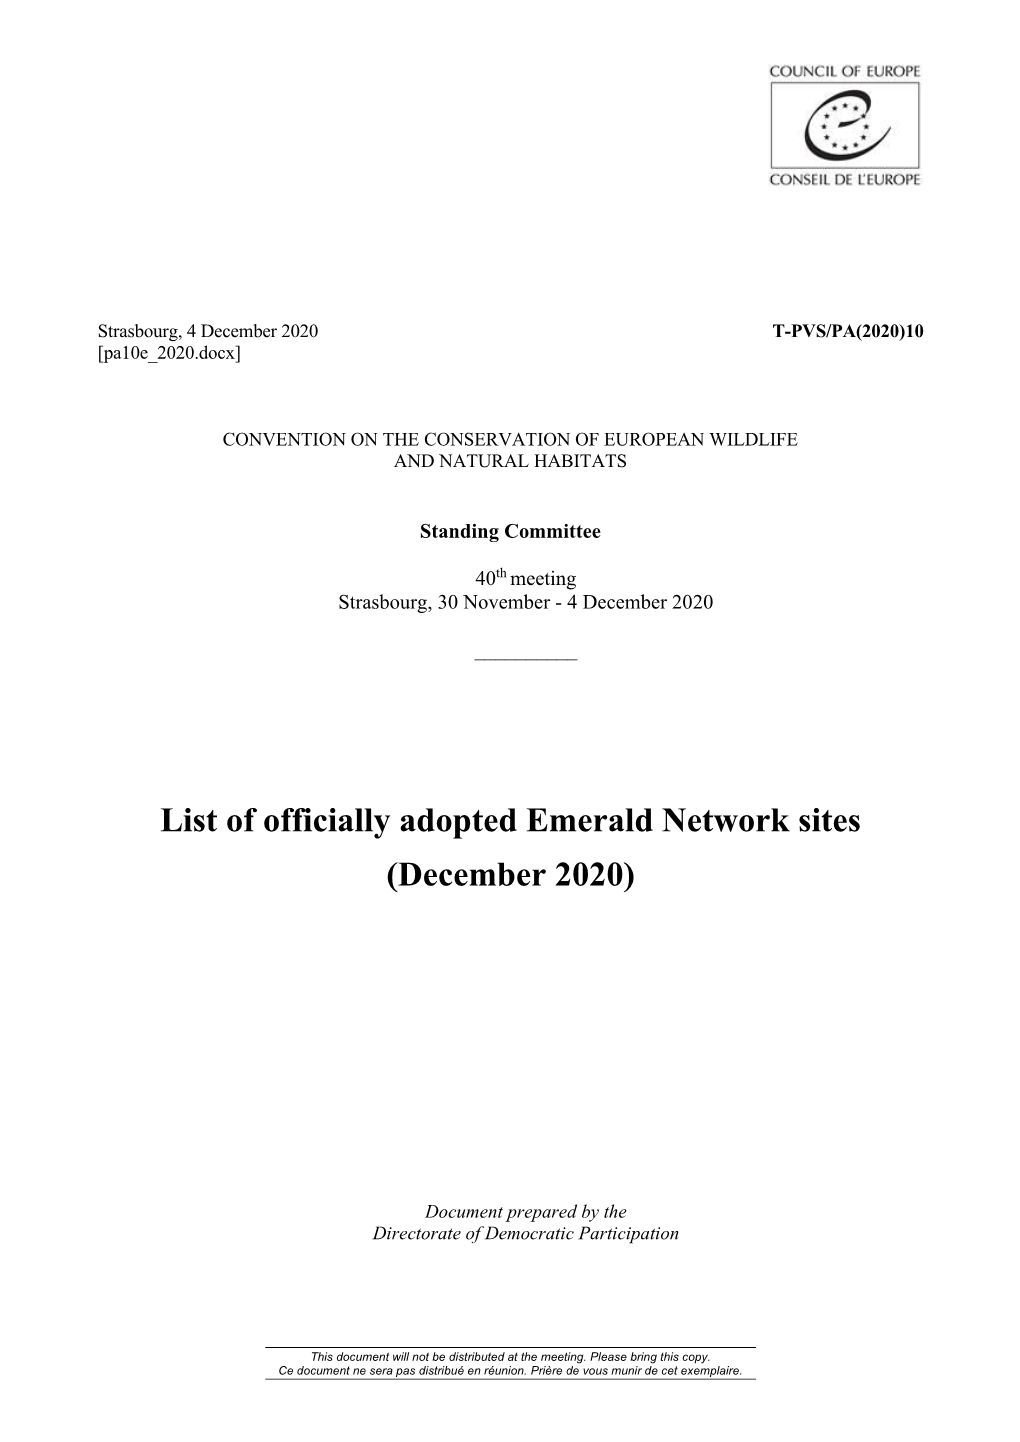 List of Officially Adopted Emerald Sites